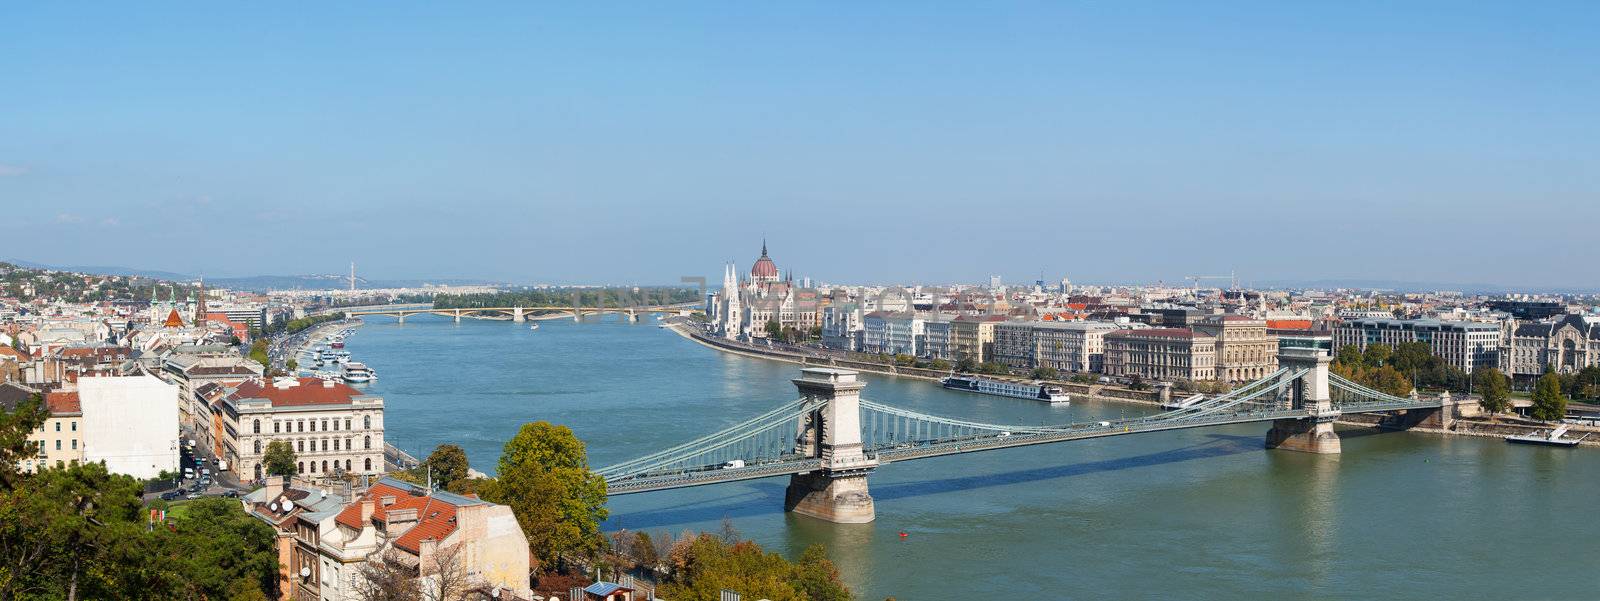 Panoramic overview of Budapest, Hungary by AndreyKr